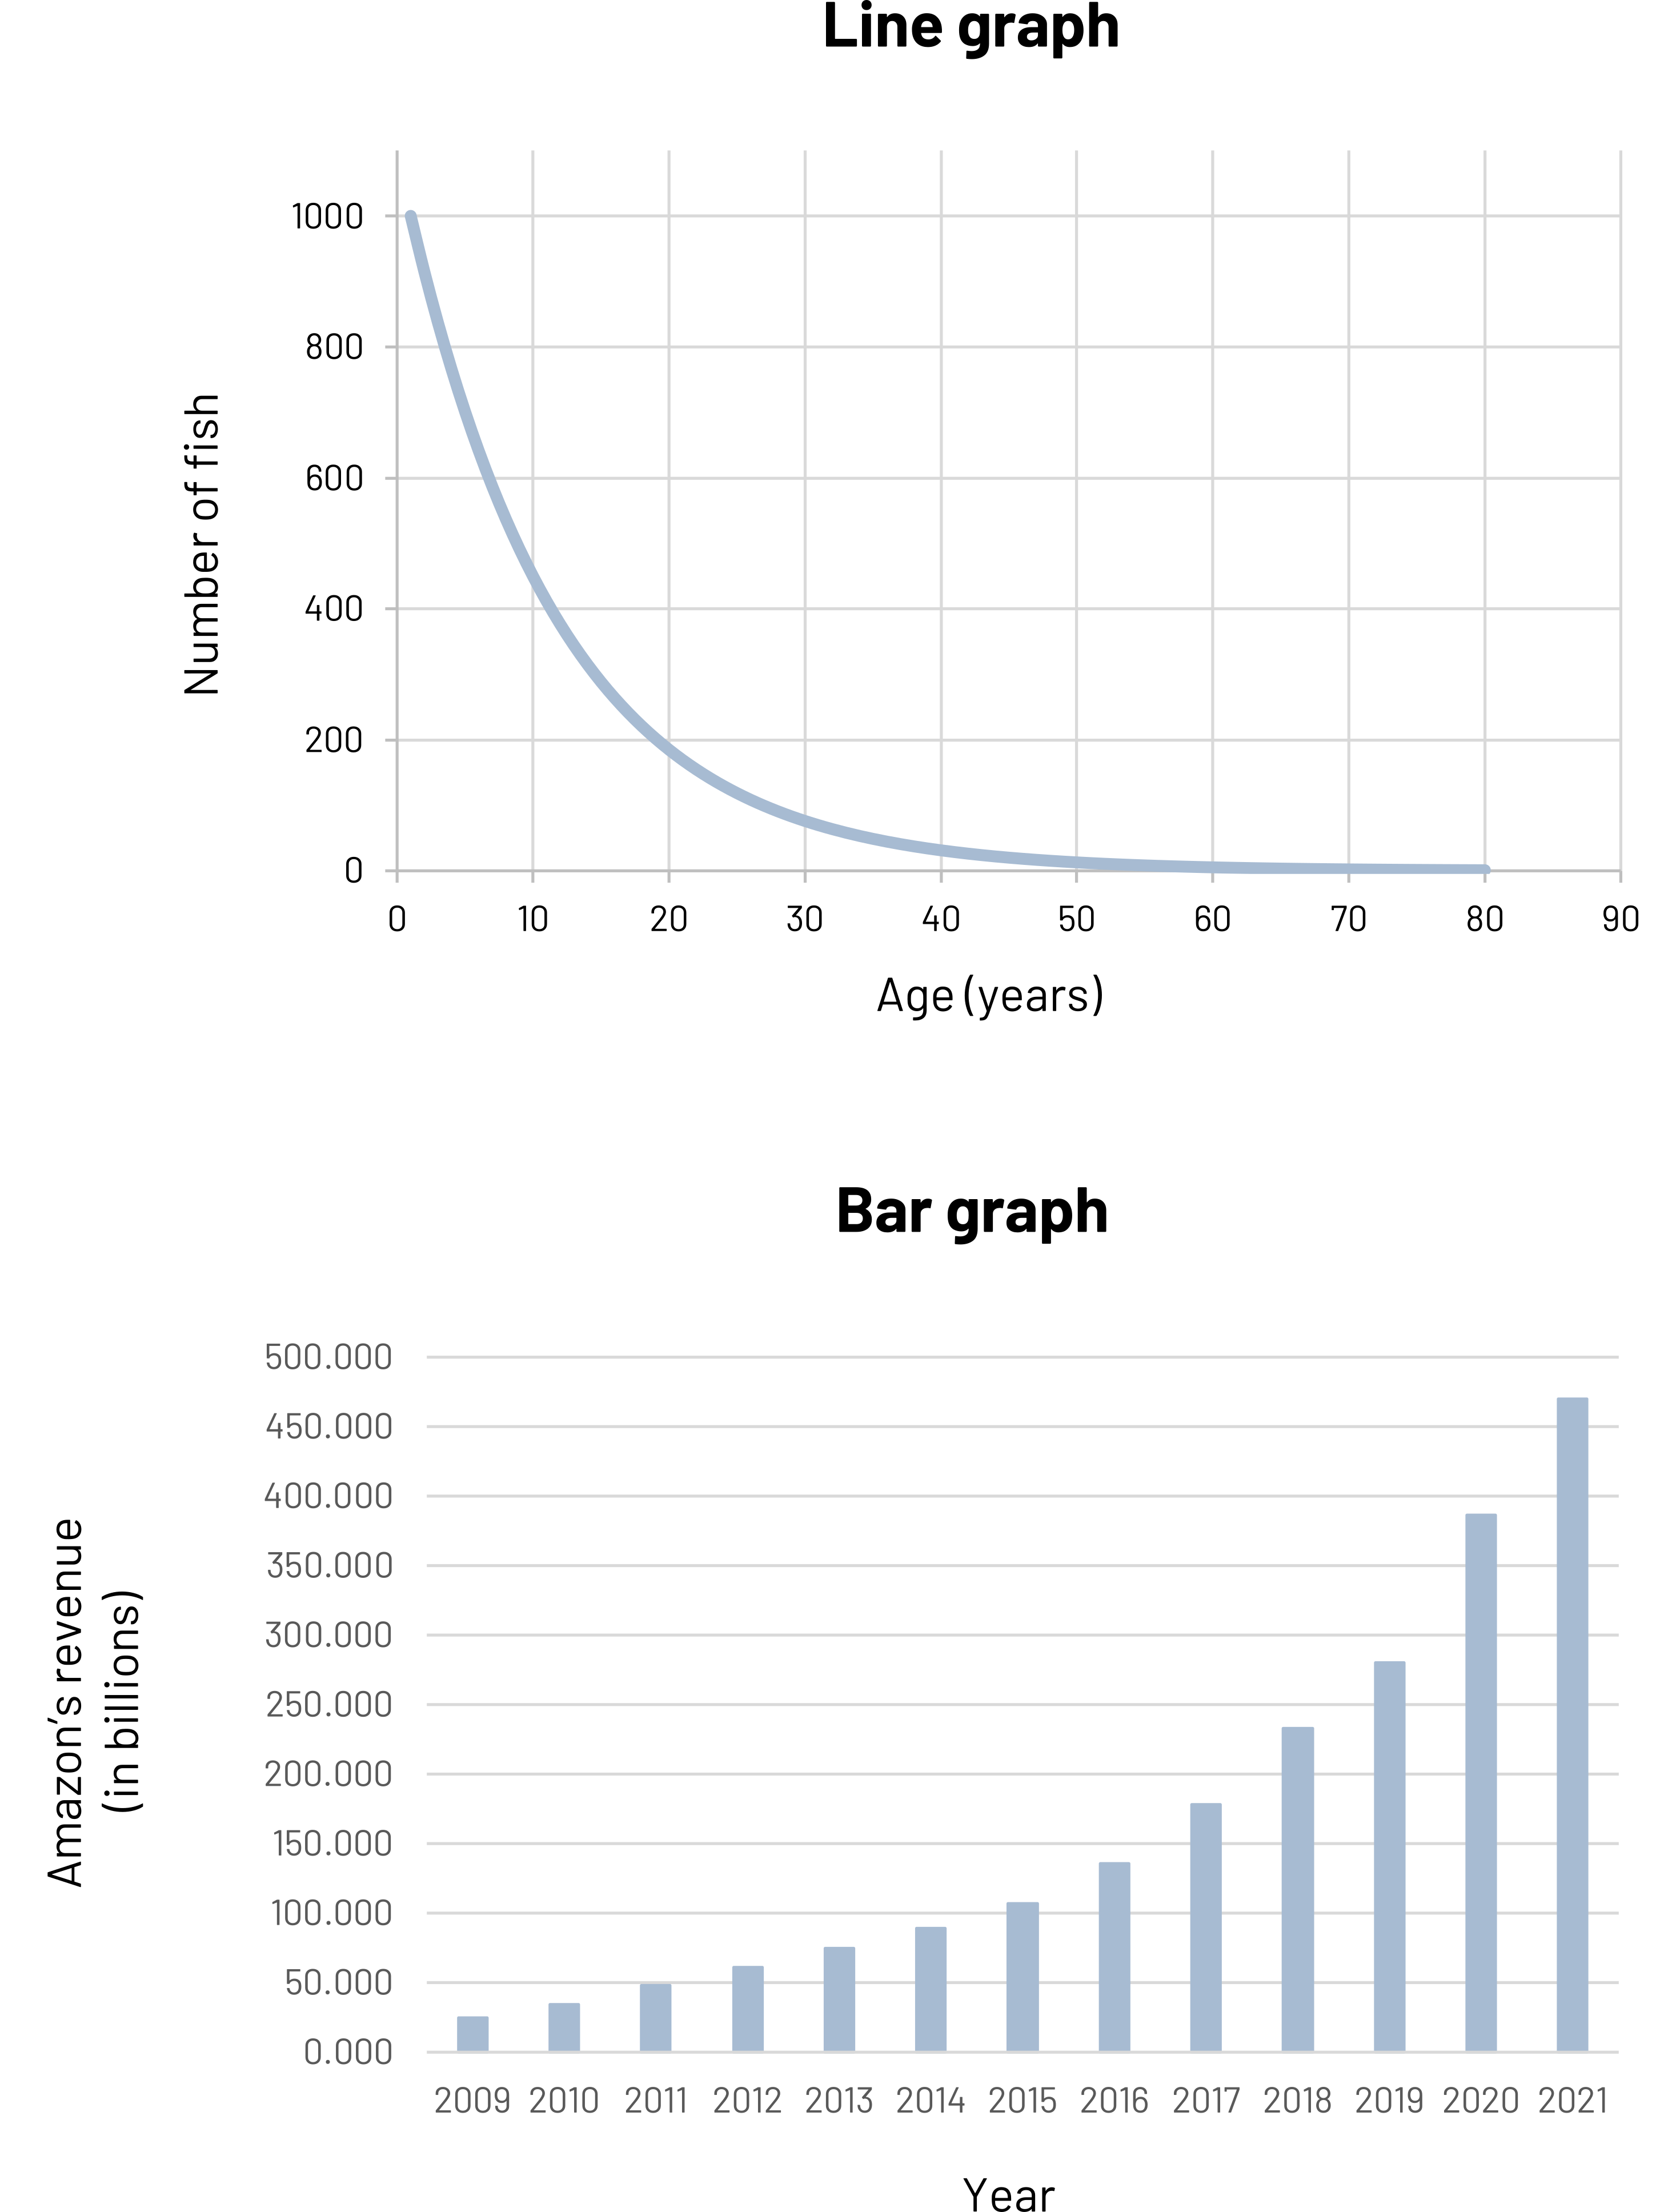 Line graph on top, bar graph on bottom. Top: x-axis is age (years) from 0 to 90, y-axis is number of fish from 0 to 1000. Line is exponential in shape (concave up, y decreases as x increases). Bottom: x-axis is year from 2009 to 2021, y-axis is Amazon's revenue in billions. Each year has a separate bar to represent its revenue. Overall shape is exponential (Concave up, y increases as x increases). Amazon's 2021 revenue is over 450 billion.